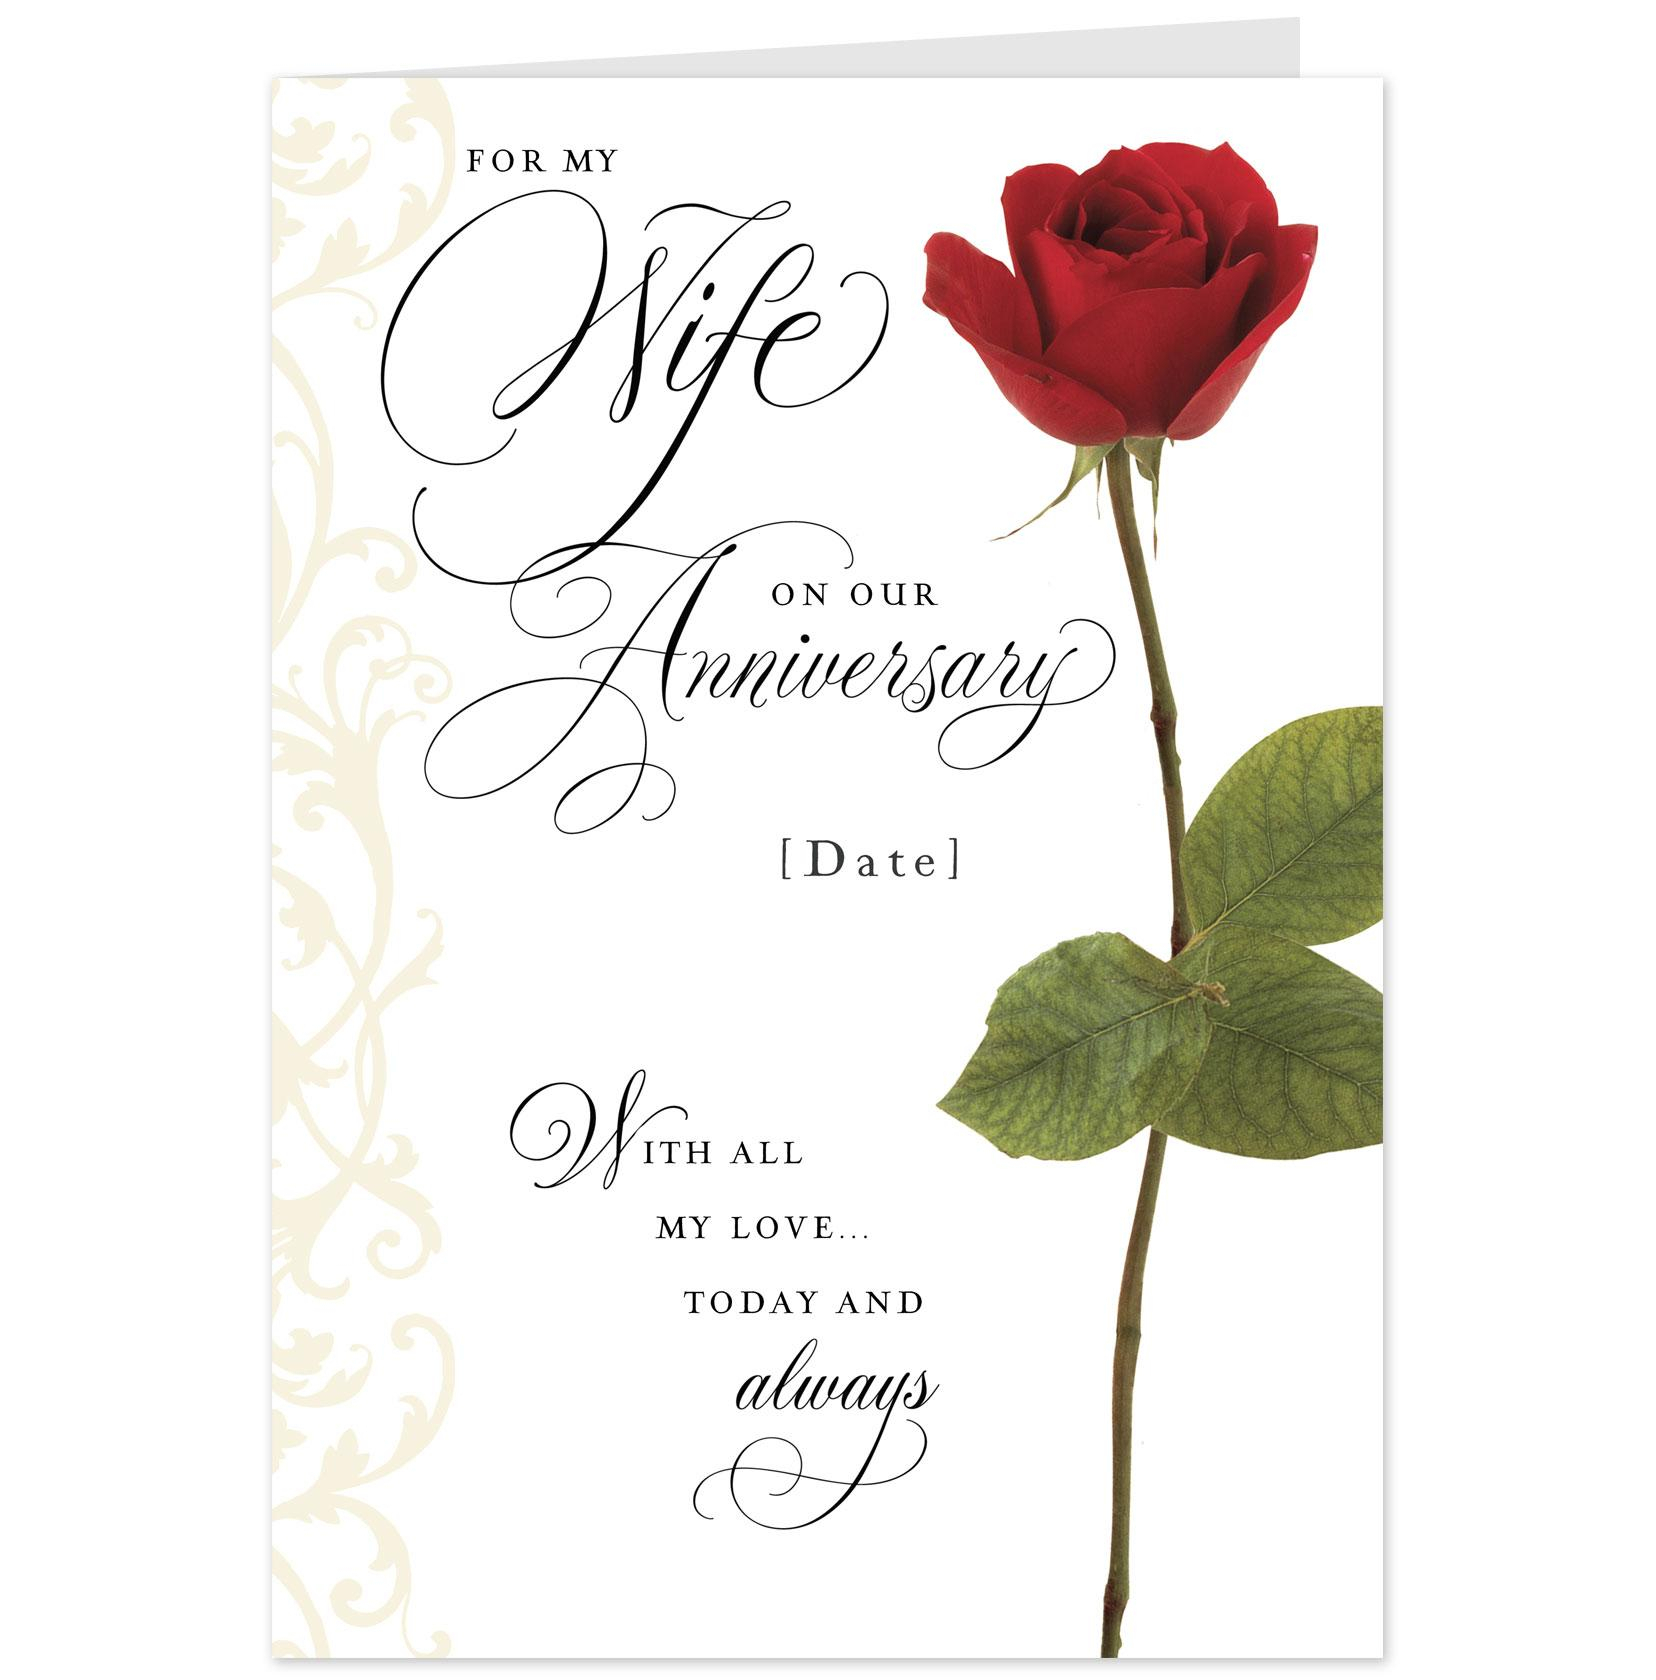 happy-anniversary-images-free-free-download-on-clipartmag